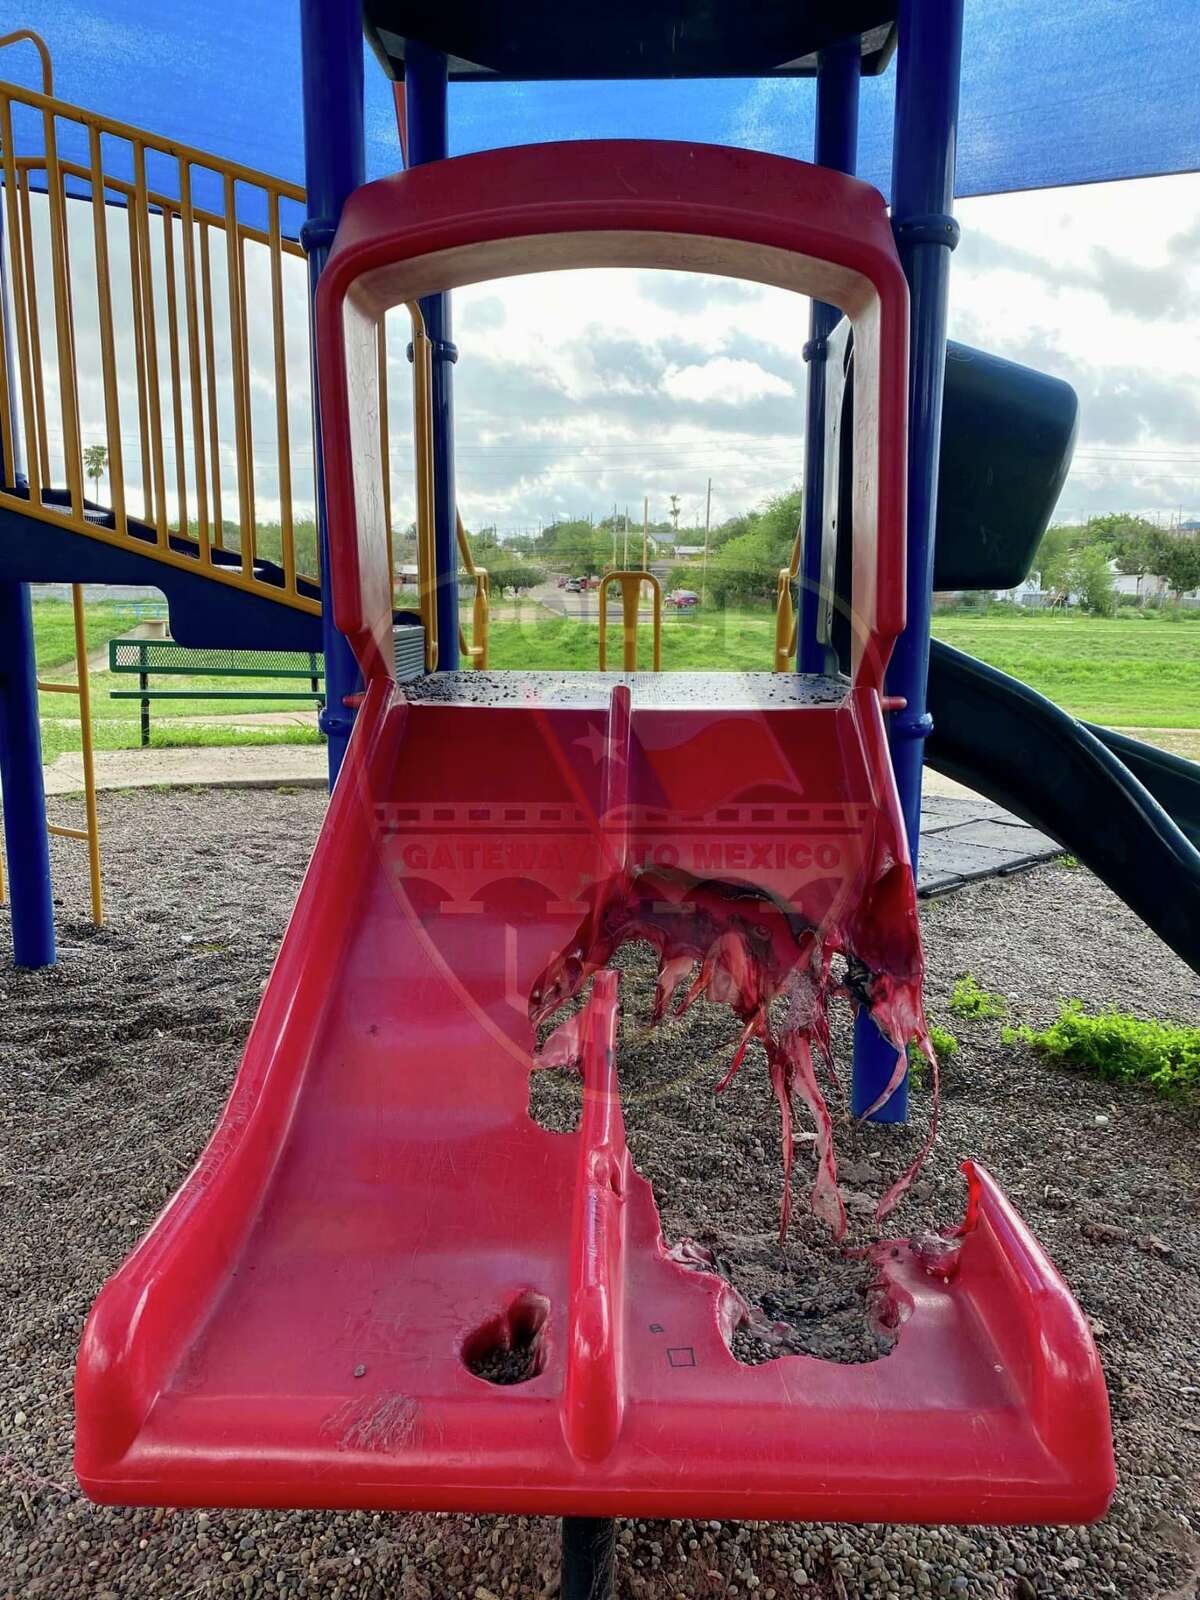 A children's playground located by Bruni Street along Zacate Creek.was vandalized on Tuesday, May 31, 2022 in Laredo.